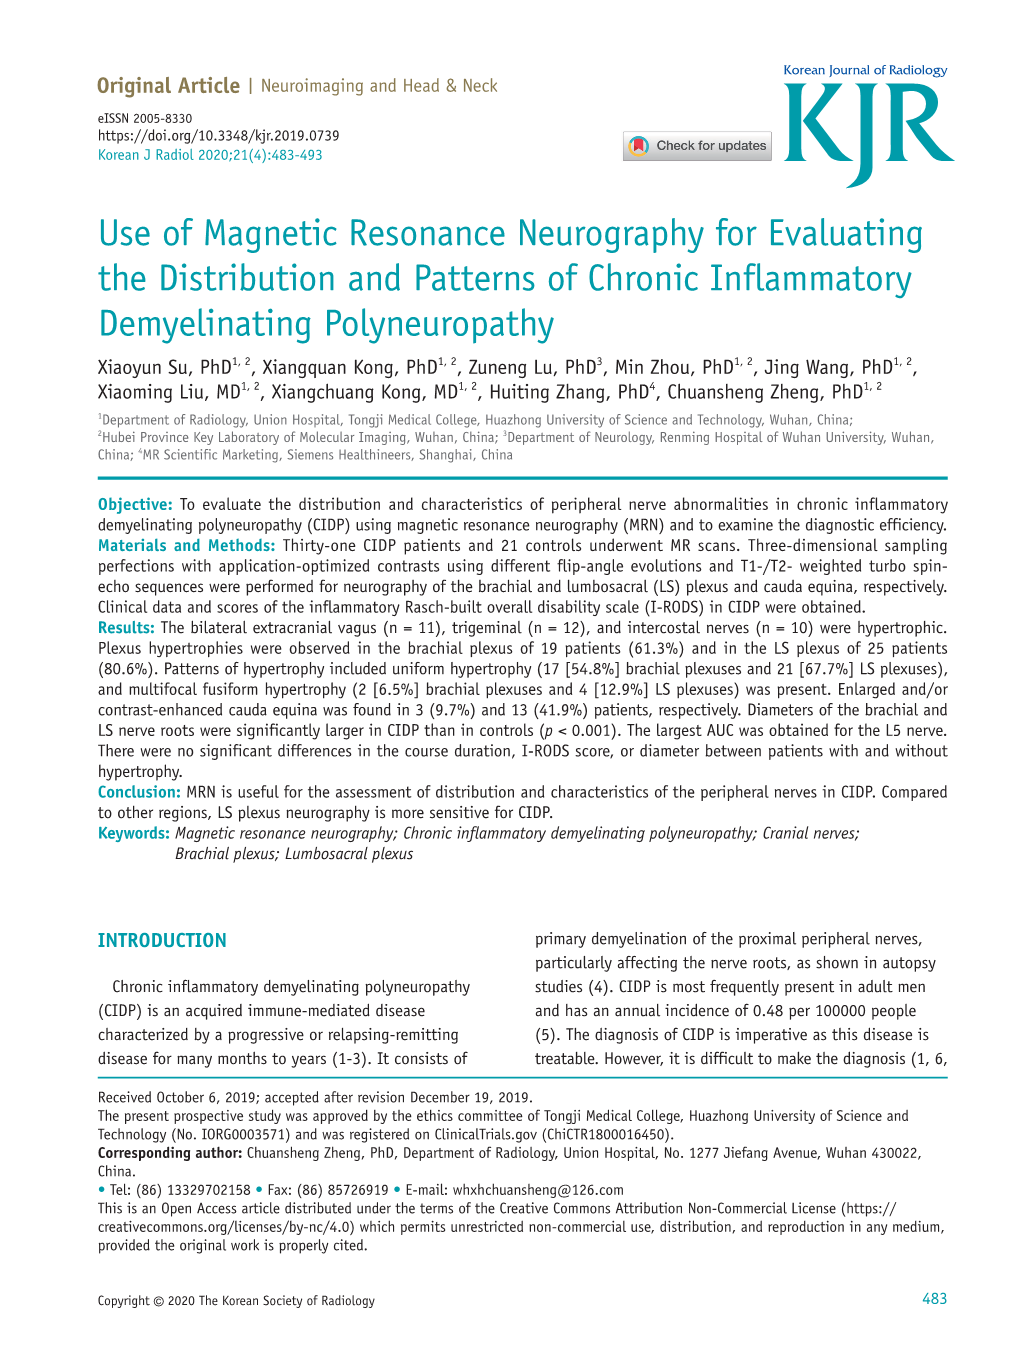 Use of Magnetic Resonance Neurography for Evaluating The